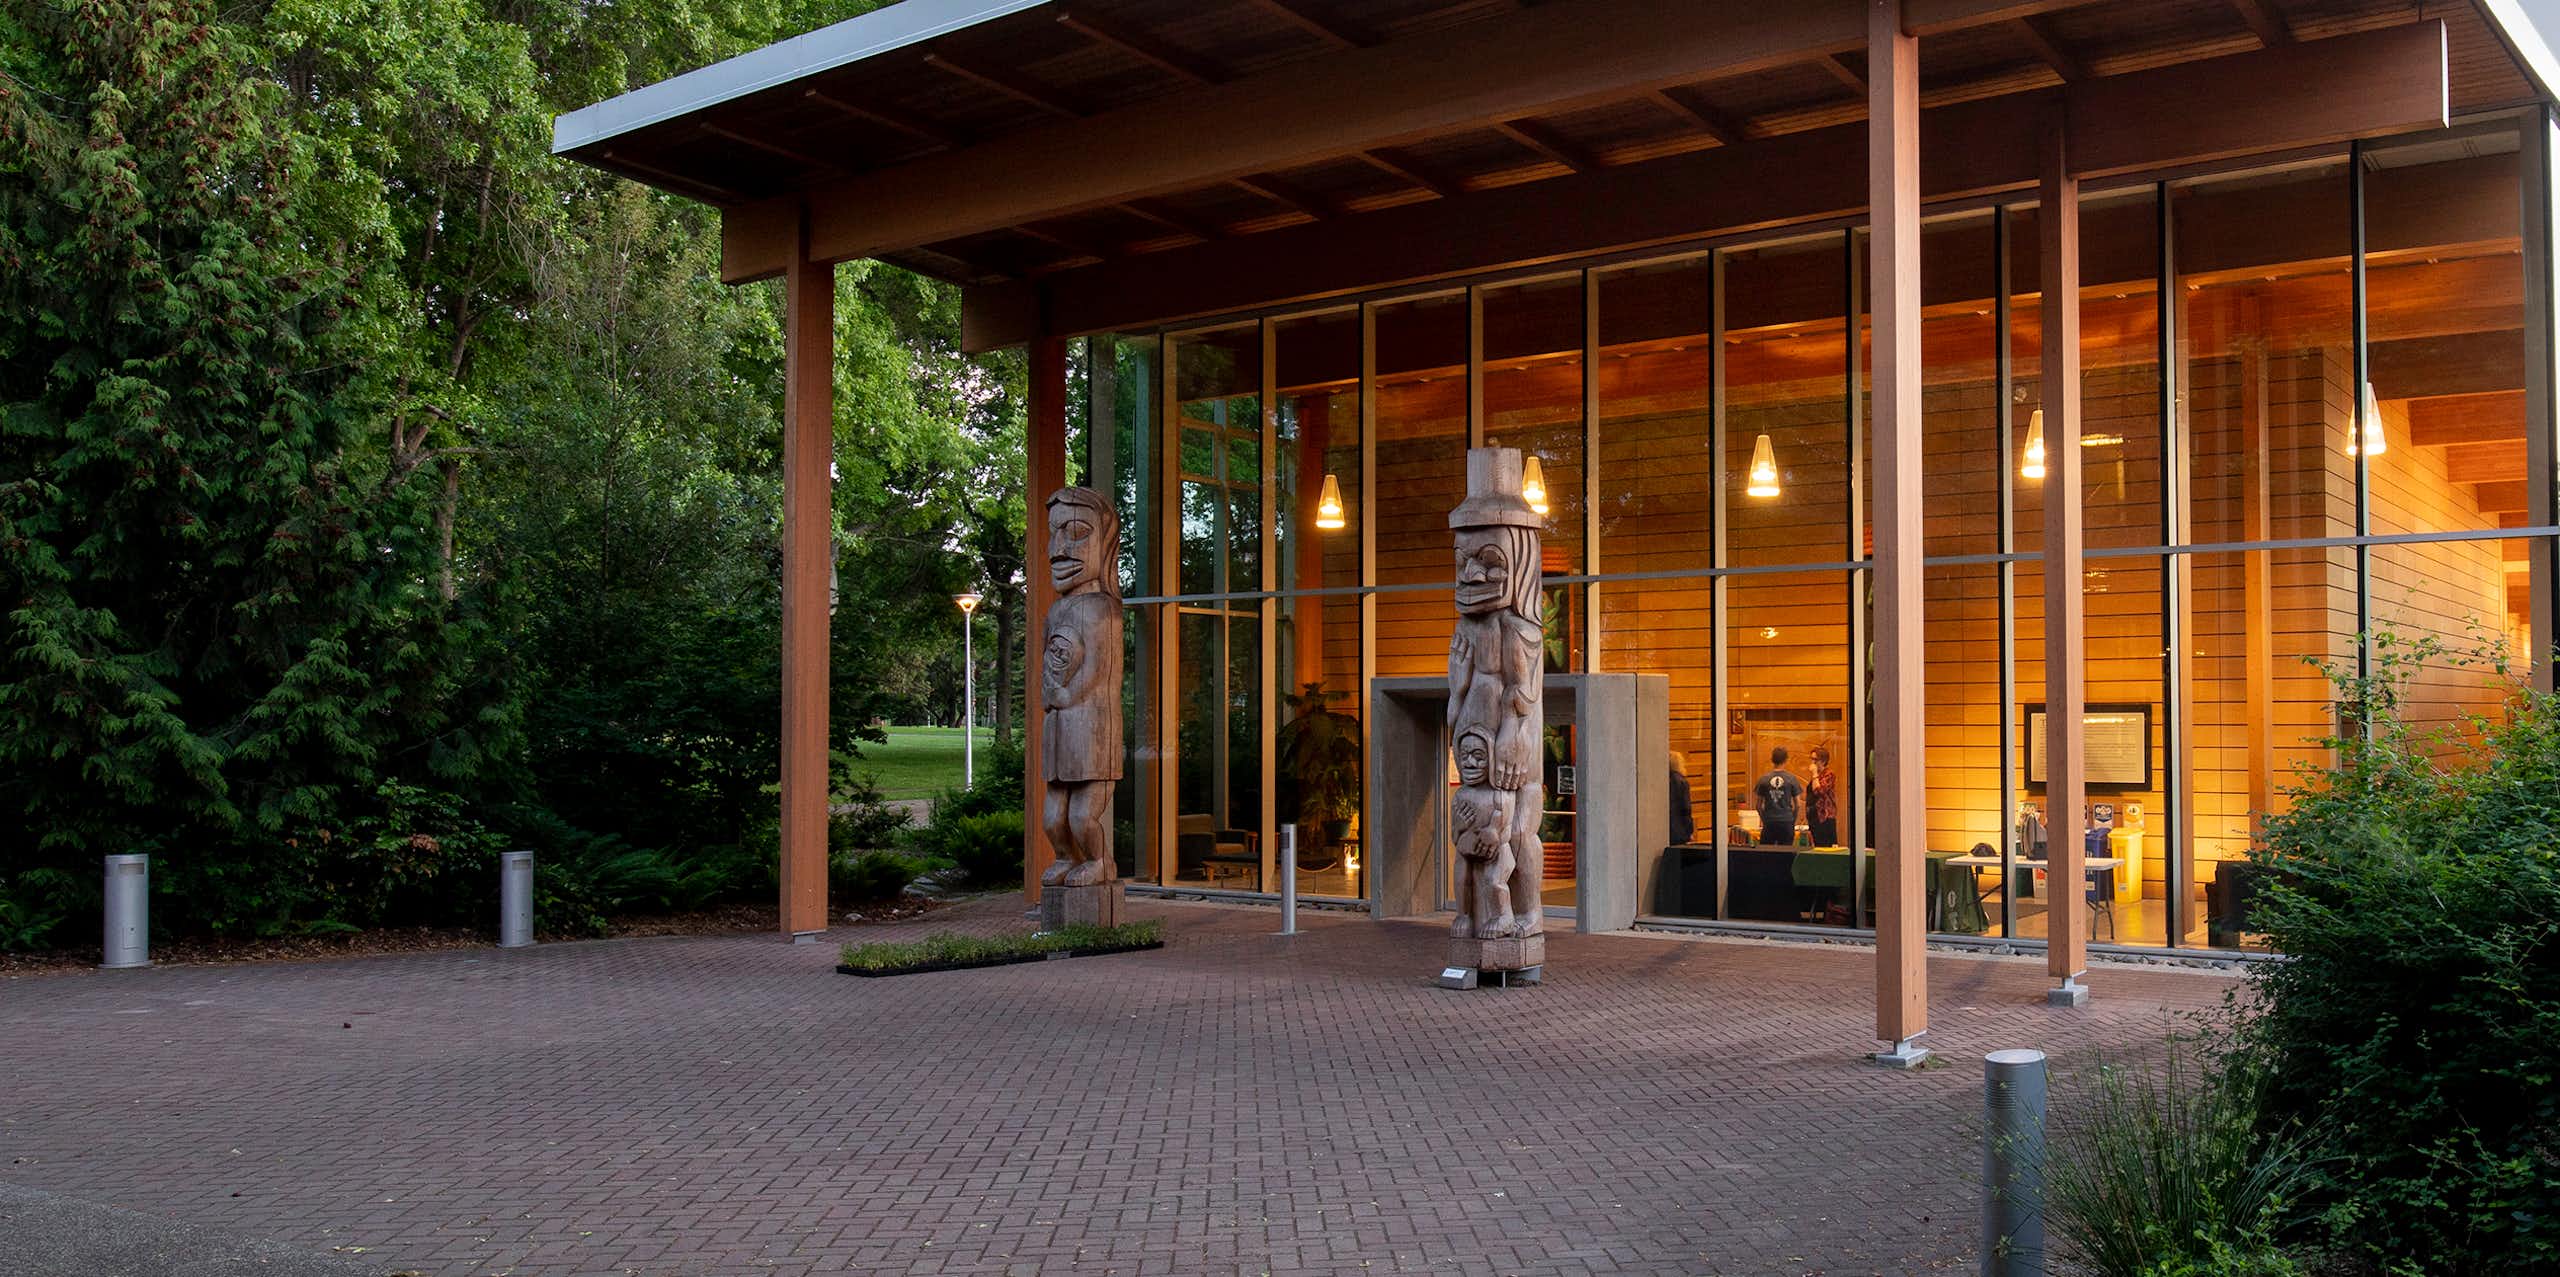 A building seen with a glass front and totem poles in the front.